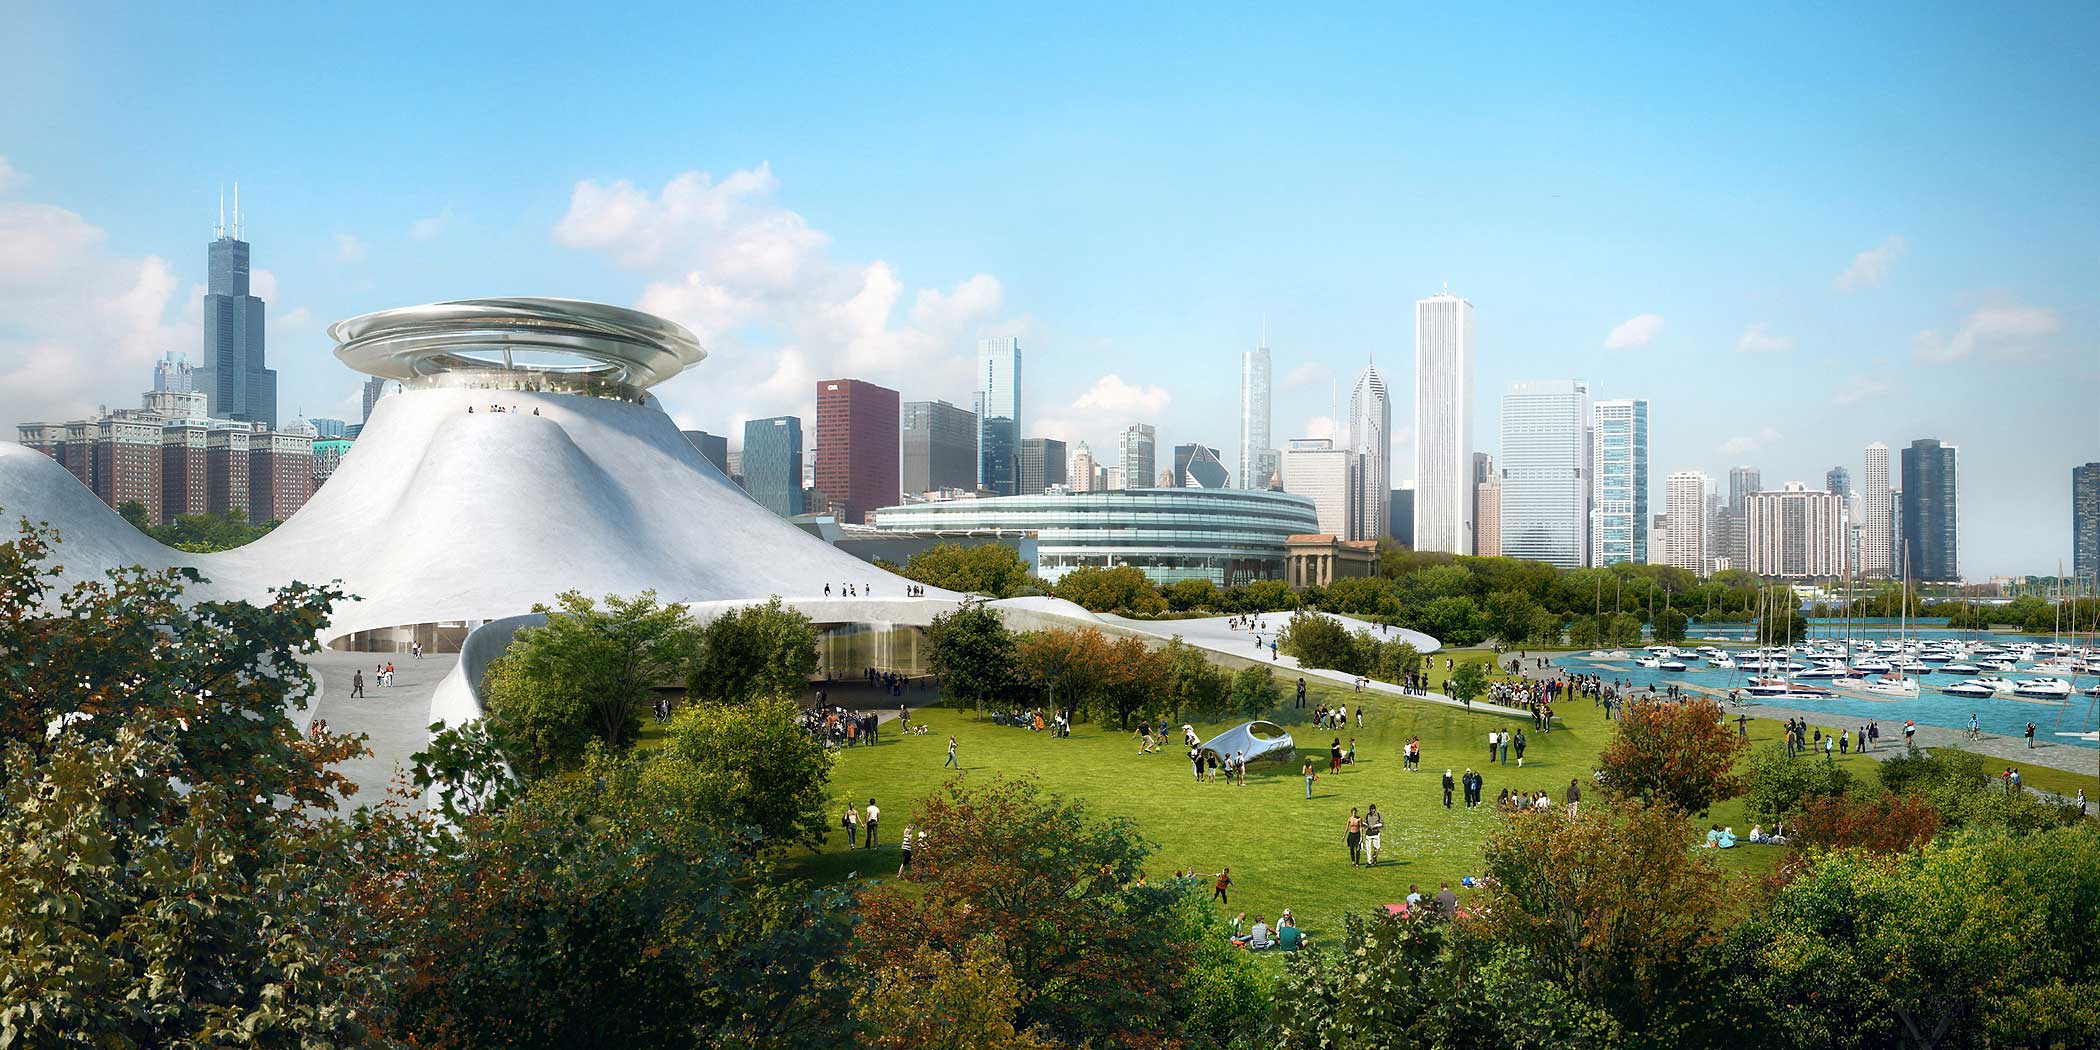 A computer rendering of the proposed Lucas Museum of Narrative Art in Chicago (Lucas Museum of Narrative Art)